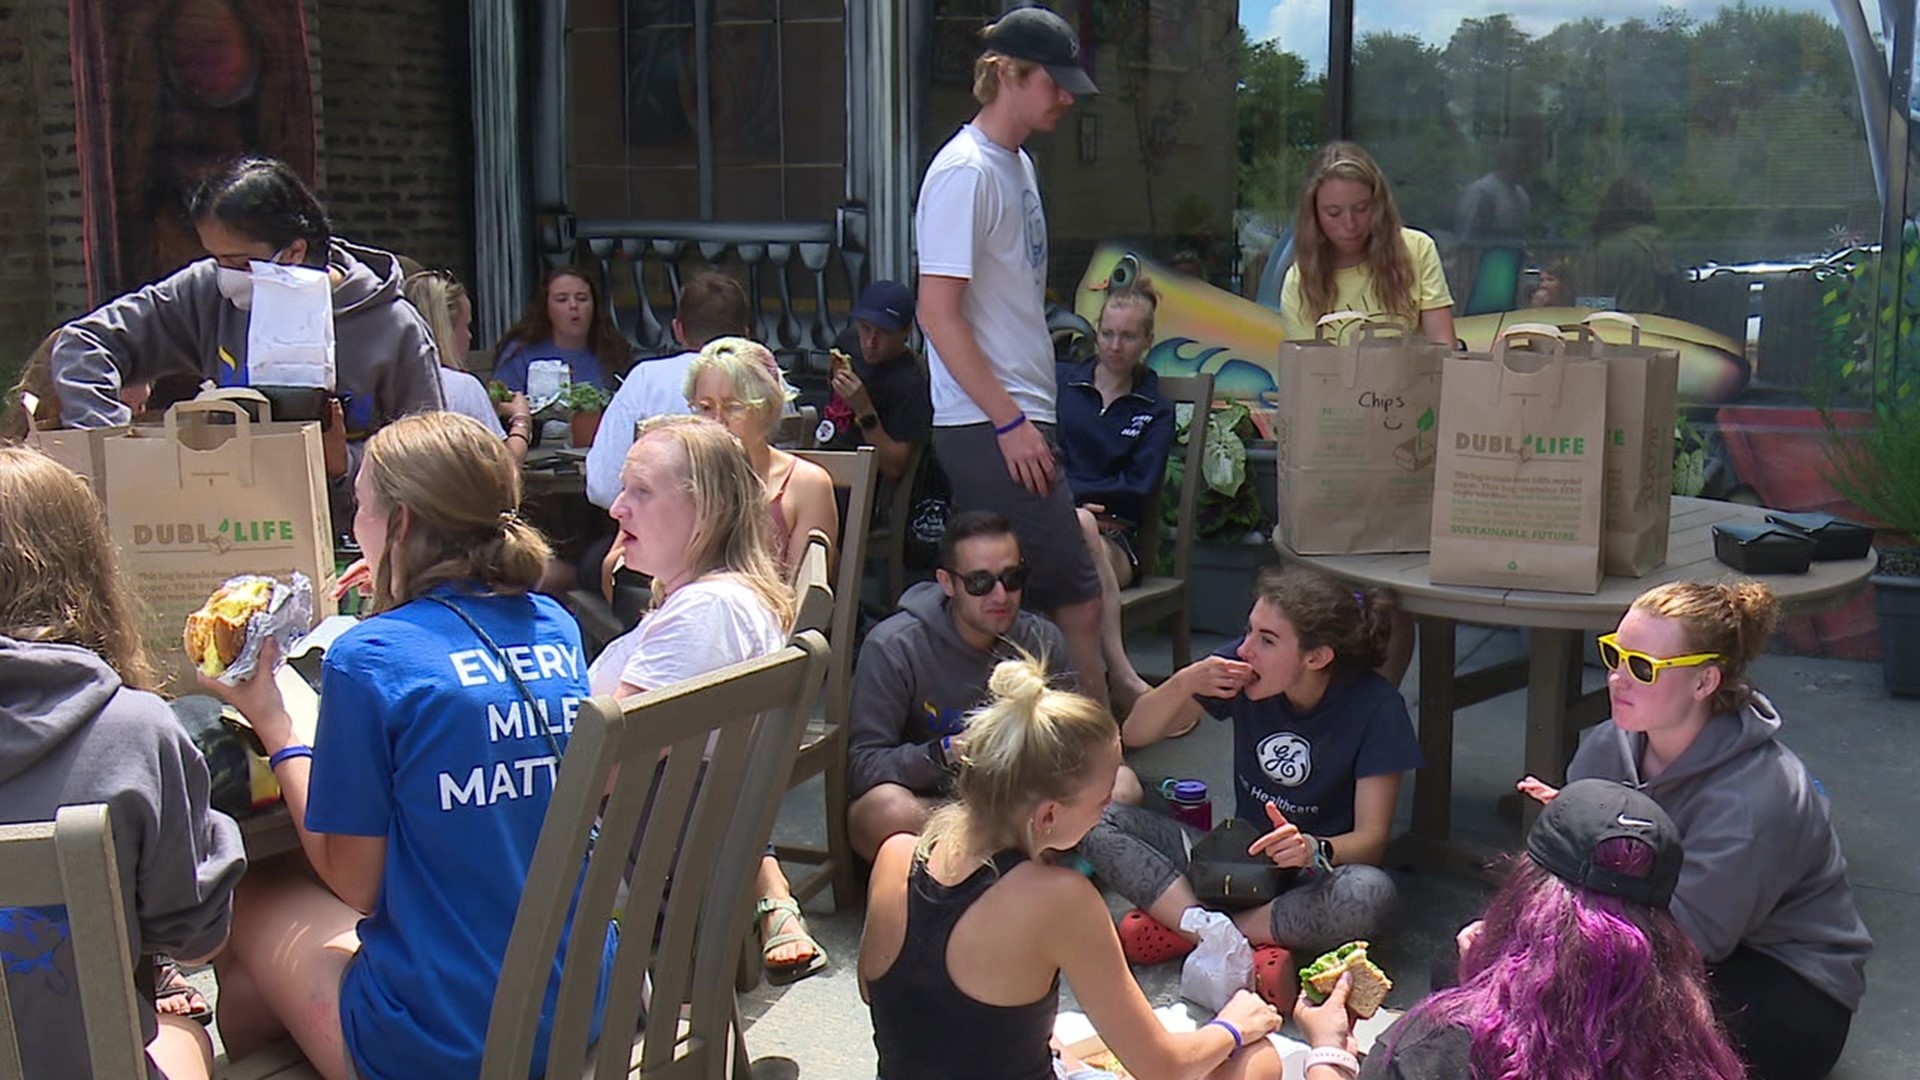 They're making the 4,500-mile trek to raise money for young adults with cancer. Business owners pitched in to provide the group with food and a place to sleep.